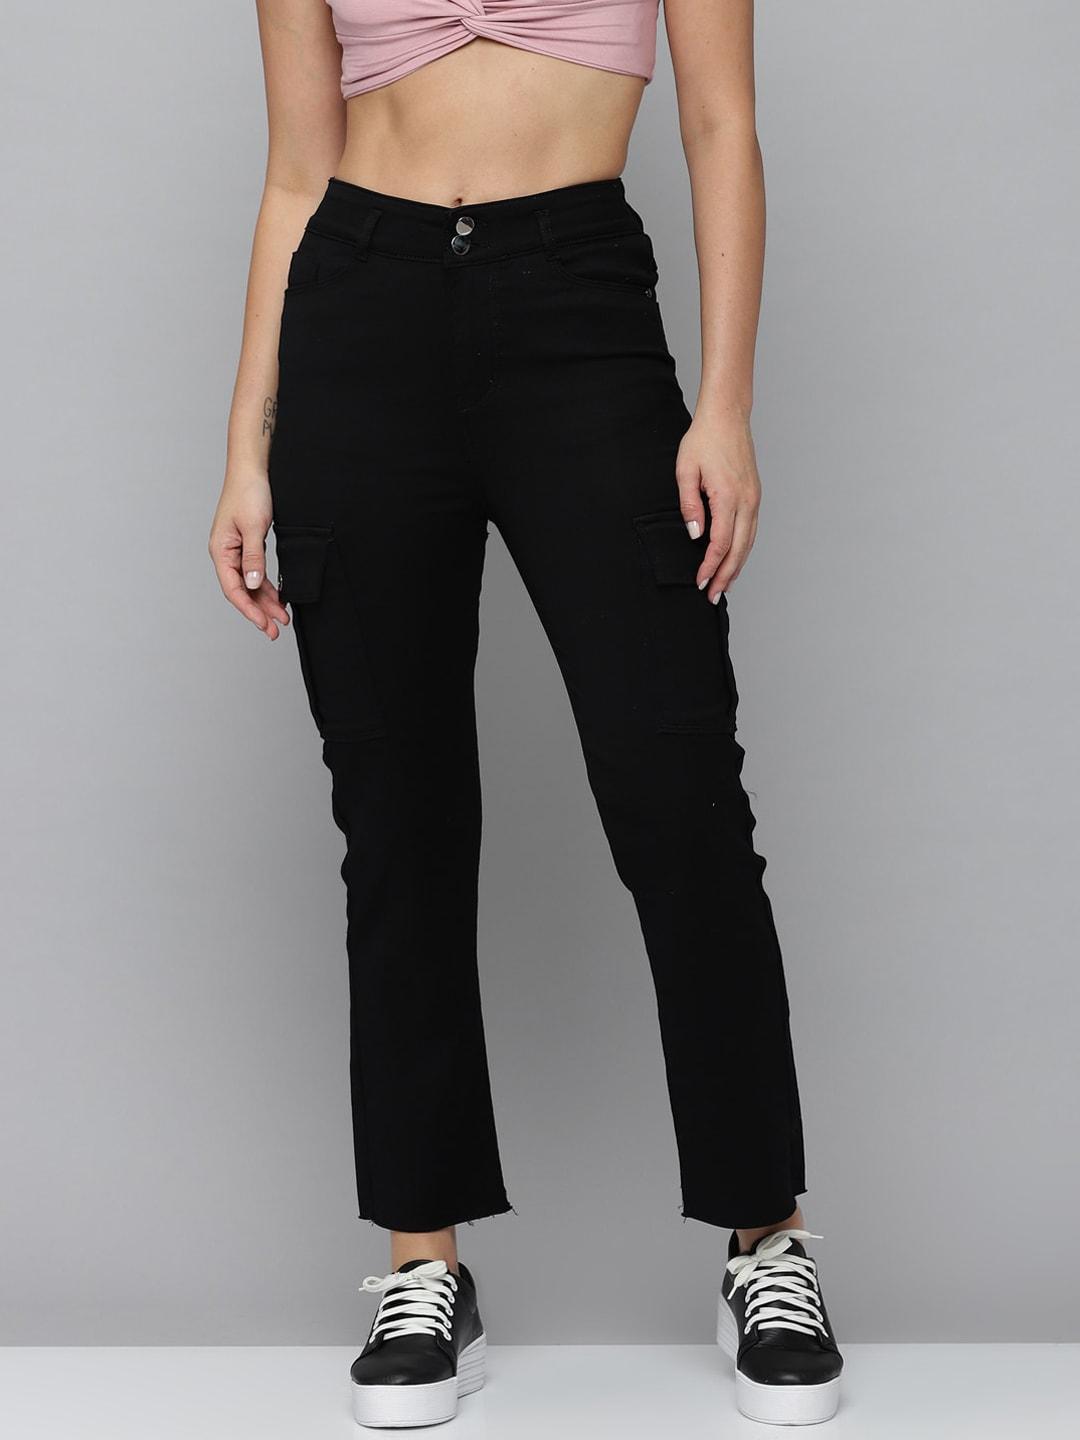 showoff-women-black-jean-straight-fit-high-rise-slash-knee-stretchable-jeans